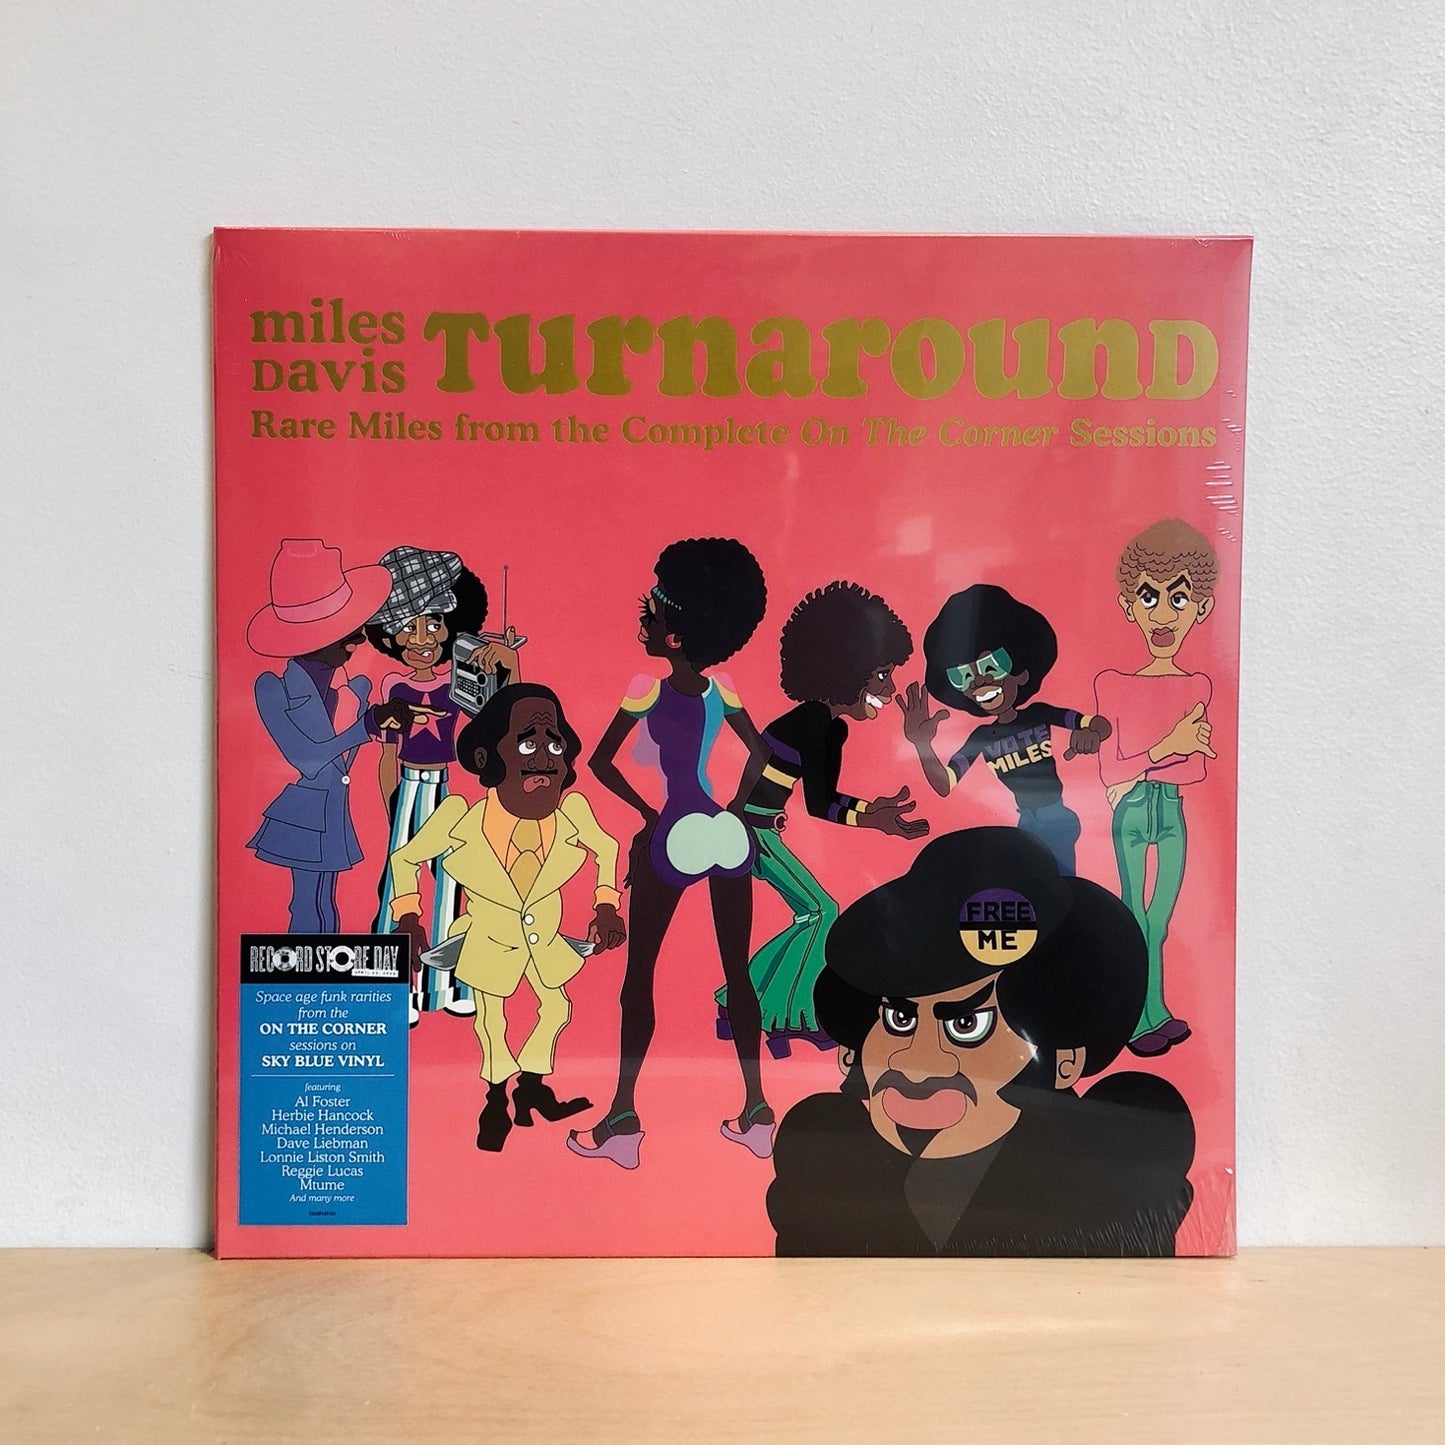 RSD2023 - MILES DAVIS - TURNAROUND - Rare Miles from the Complete On The Corner Sessions. LP [SKY BLUE VINYL EDITION]